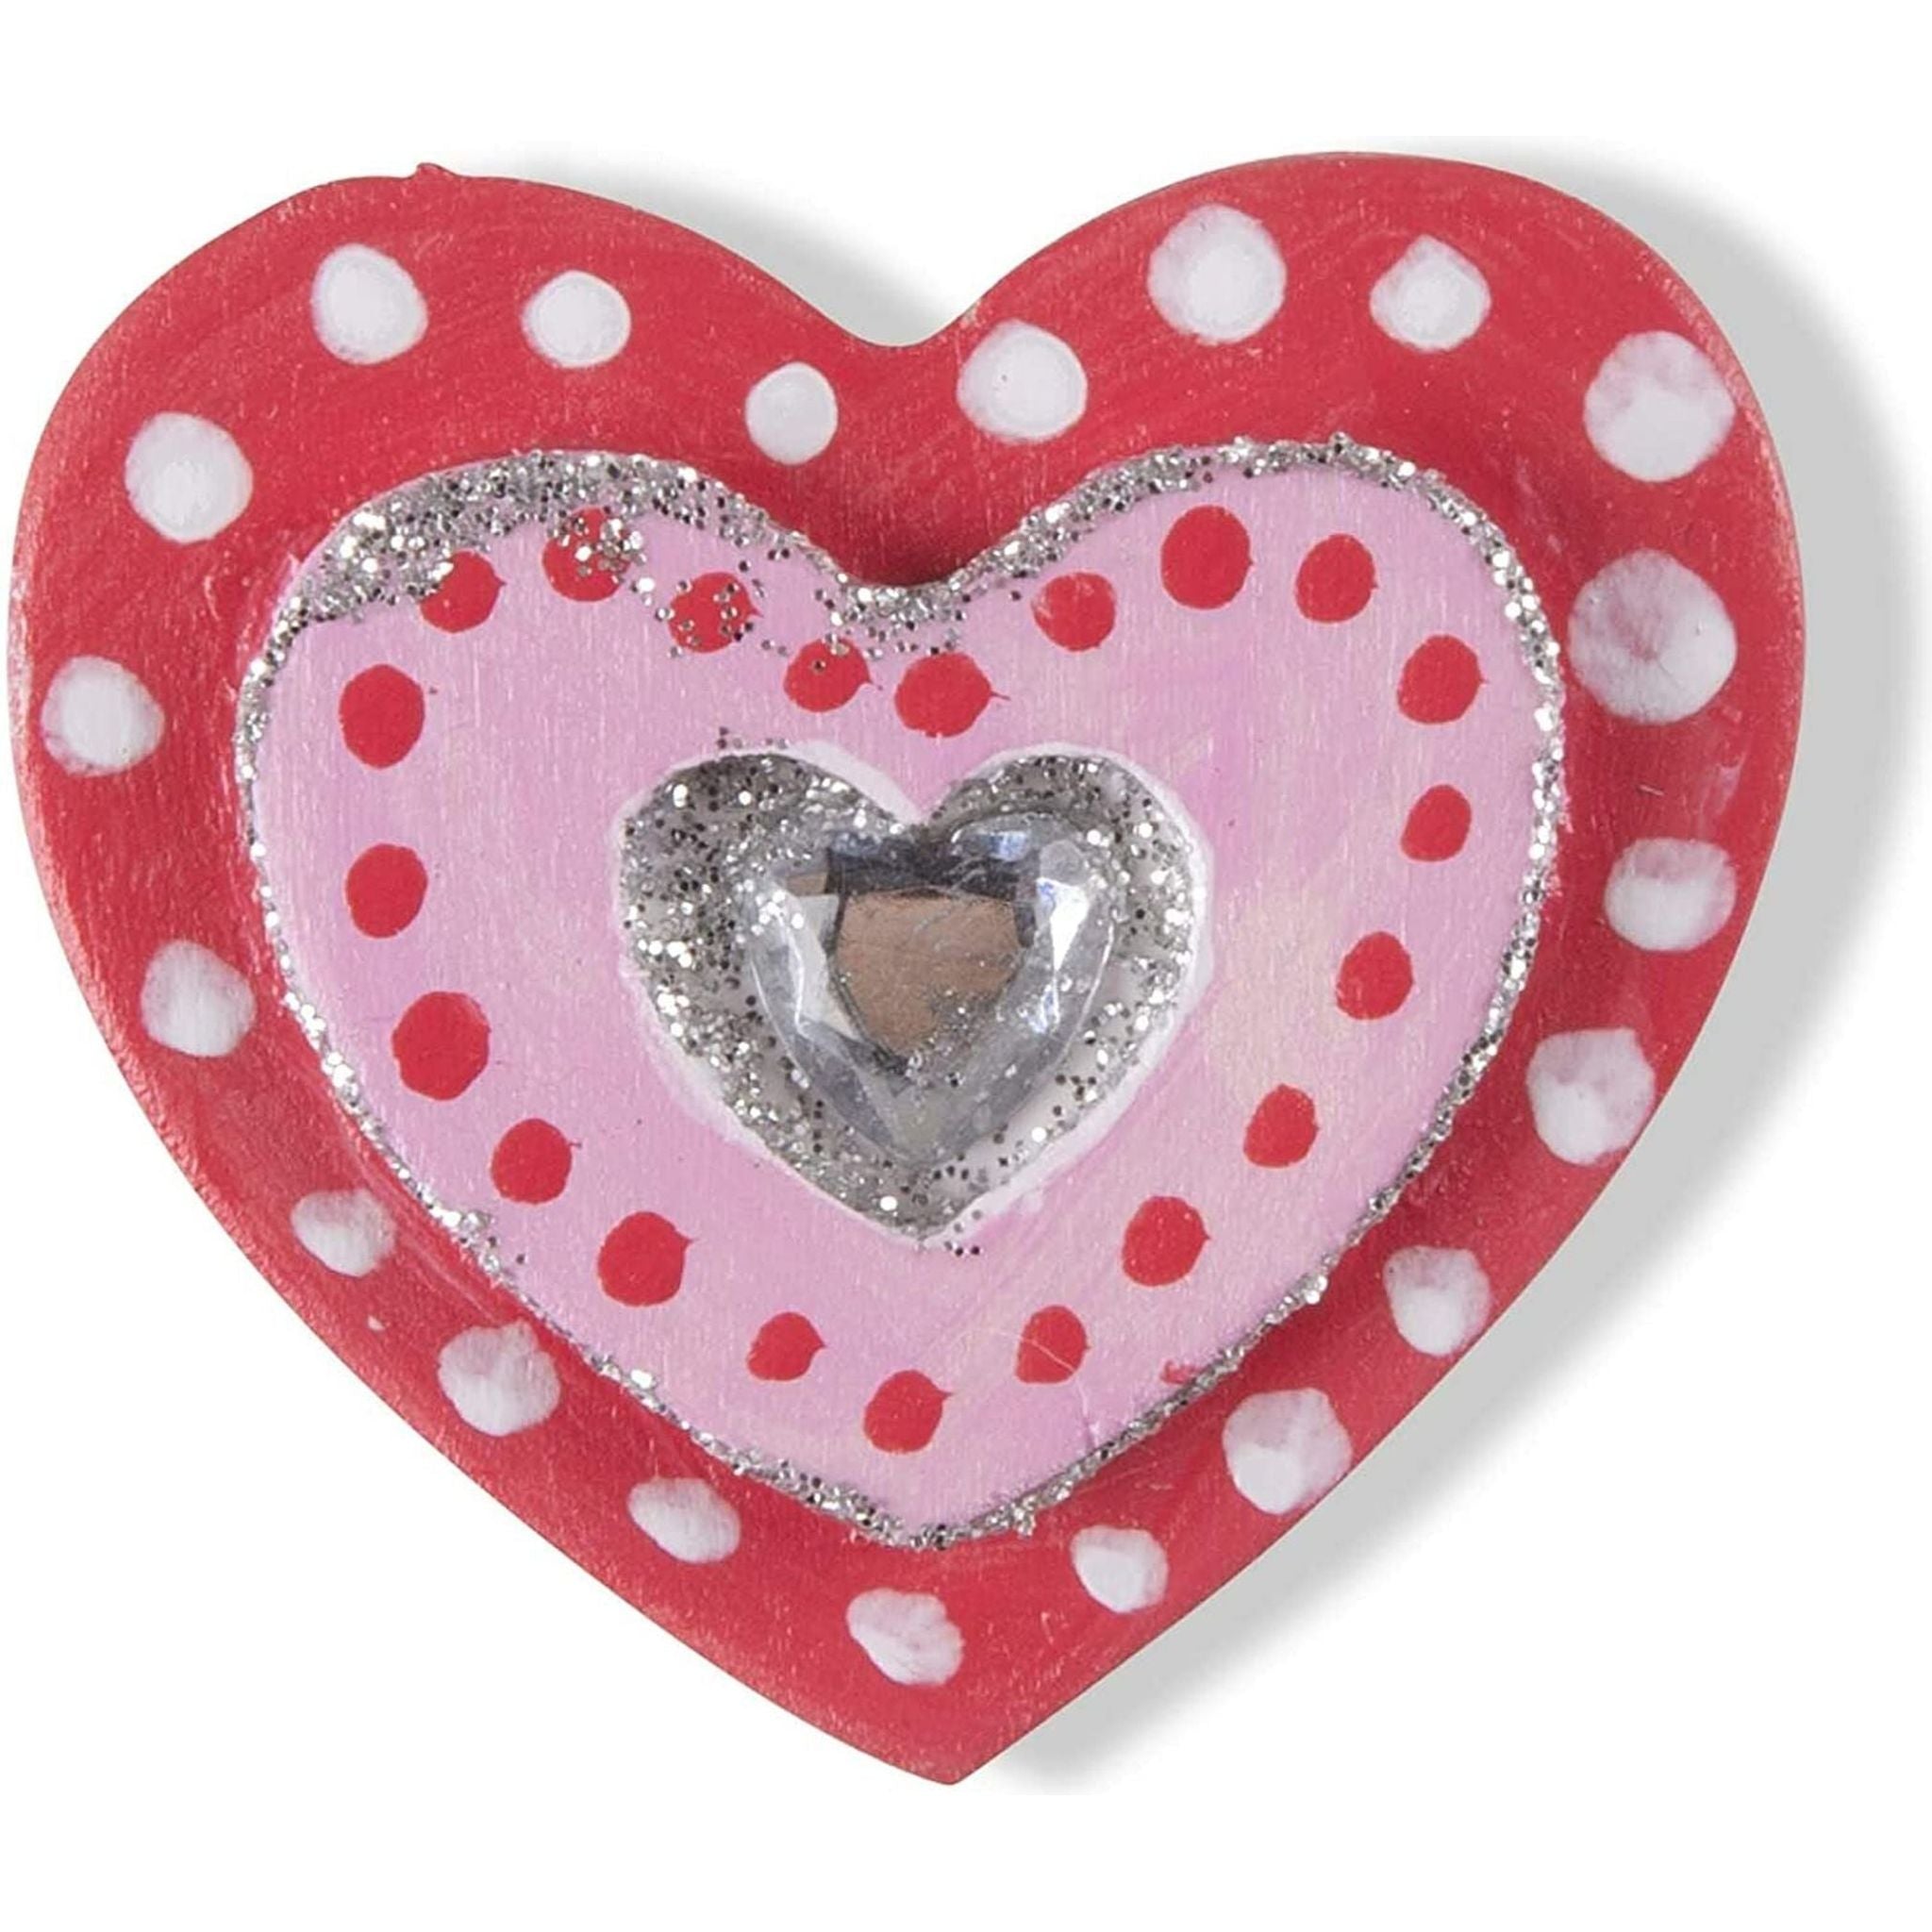 Melissa & Doug - Created by Me! Heart Magnets - Toybox Tales